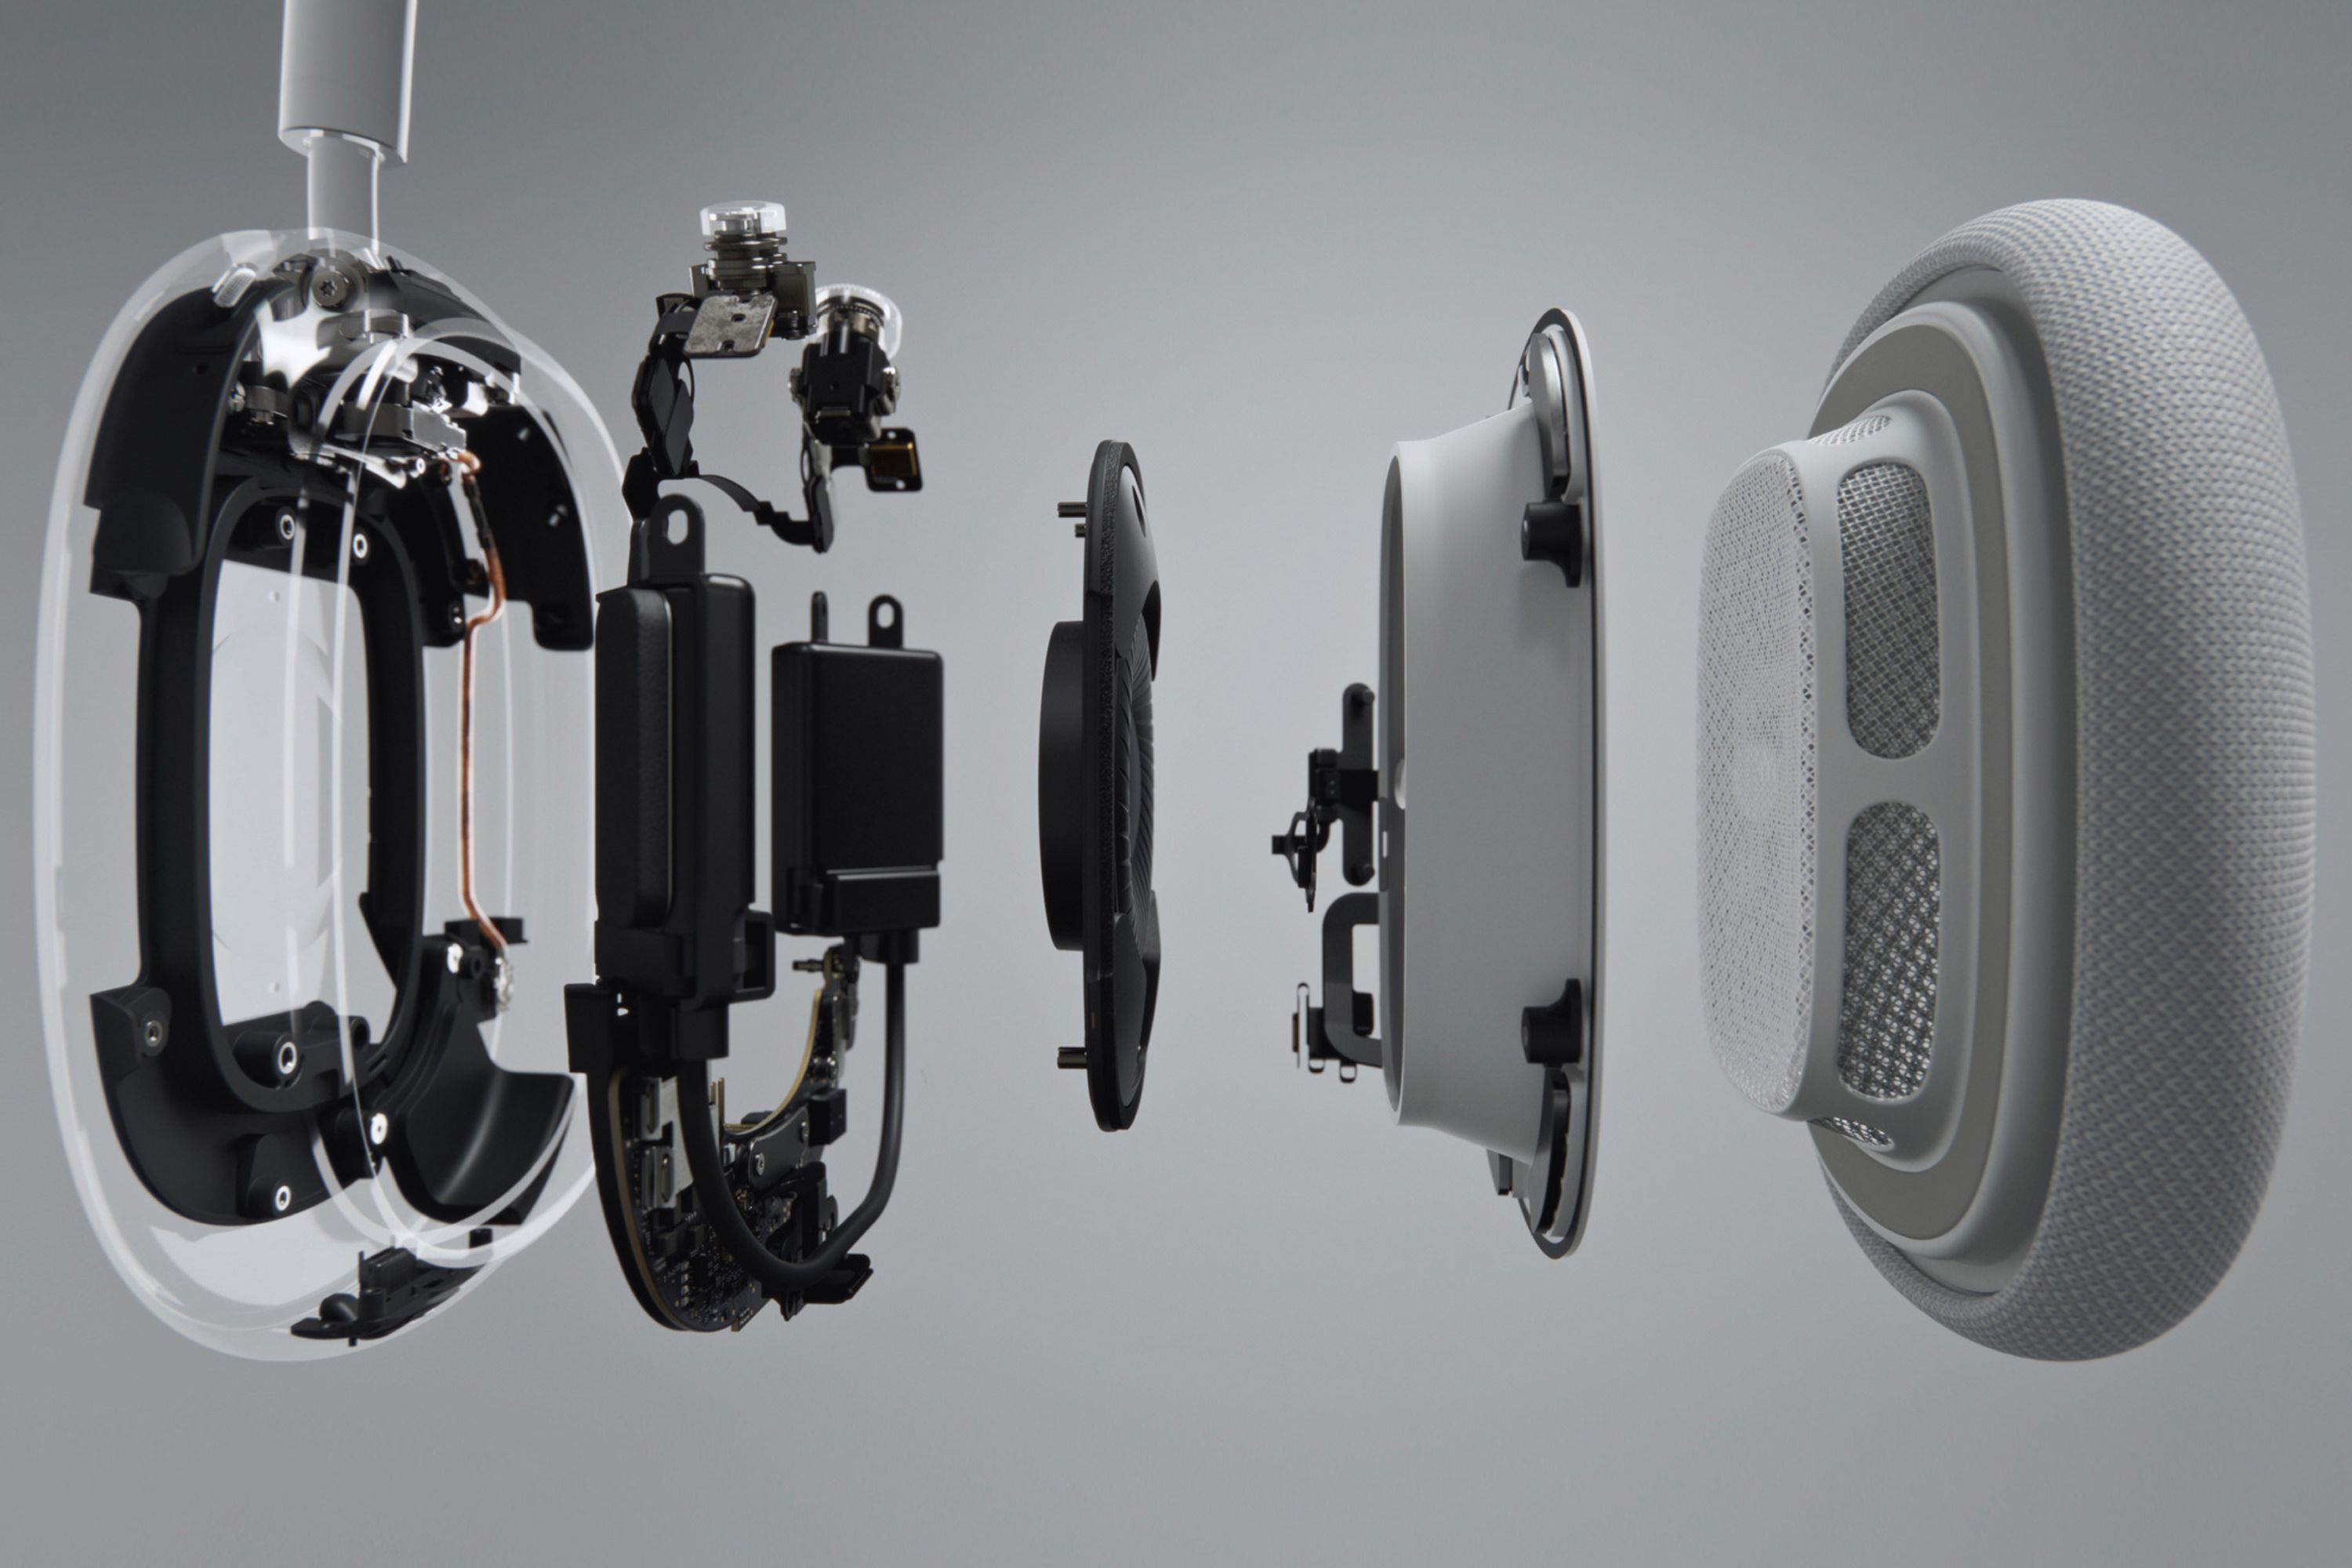 Internal components of Apple AirPods Max